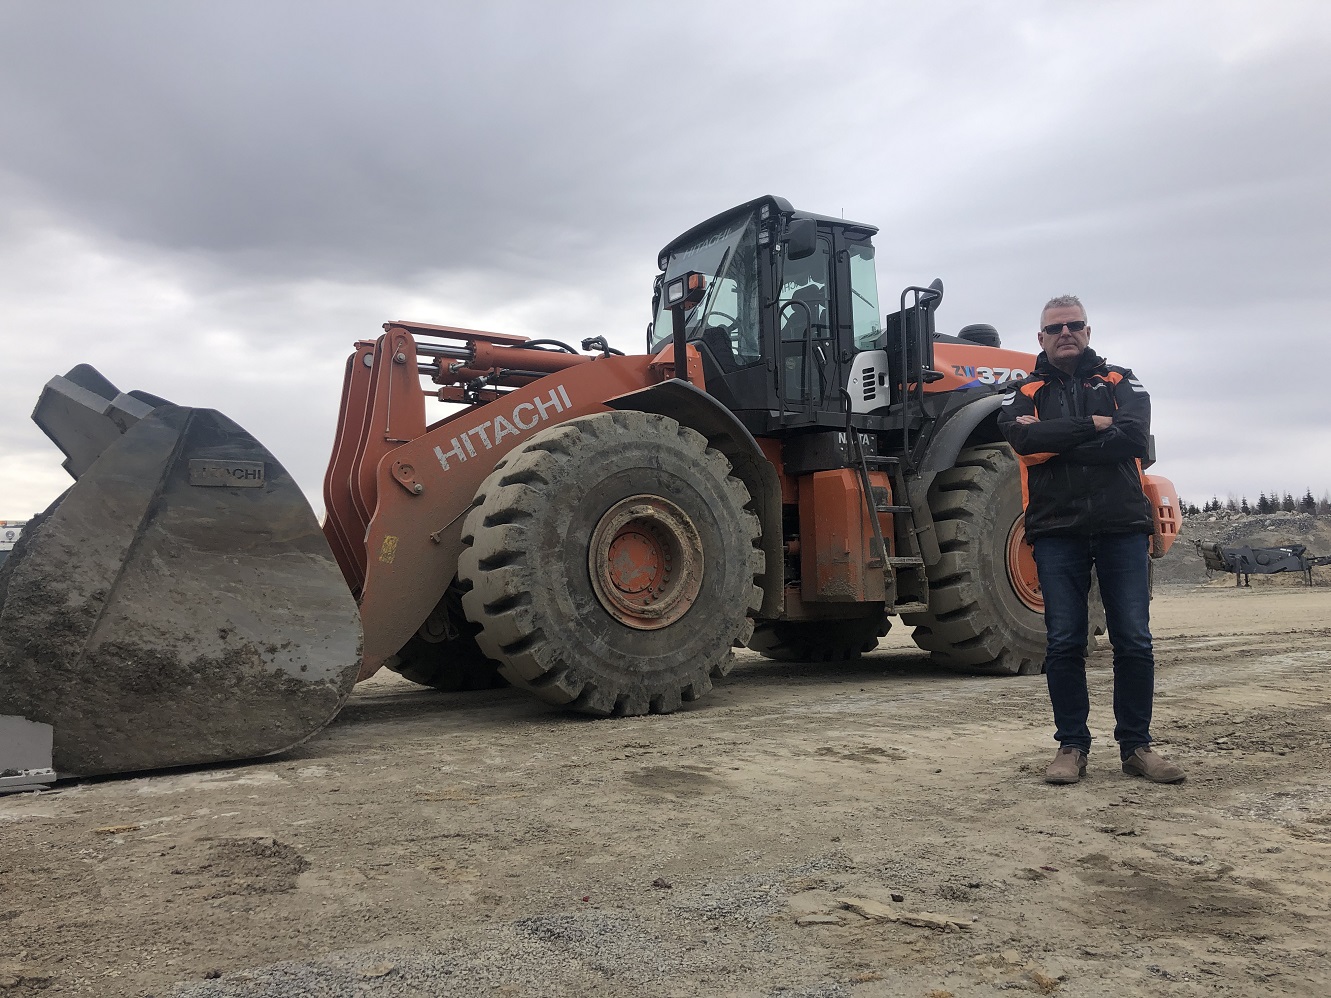 Tore Wethal, owner of the Herstua Grus quarry, with its Hitachi ZW370-6 wheeled loader